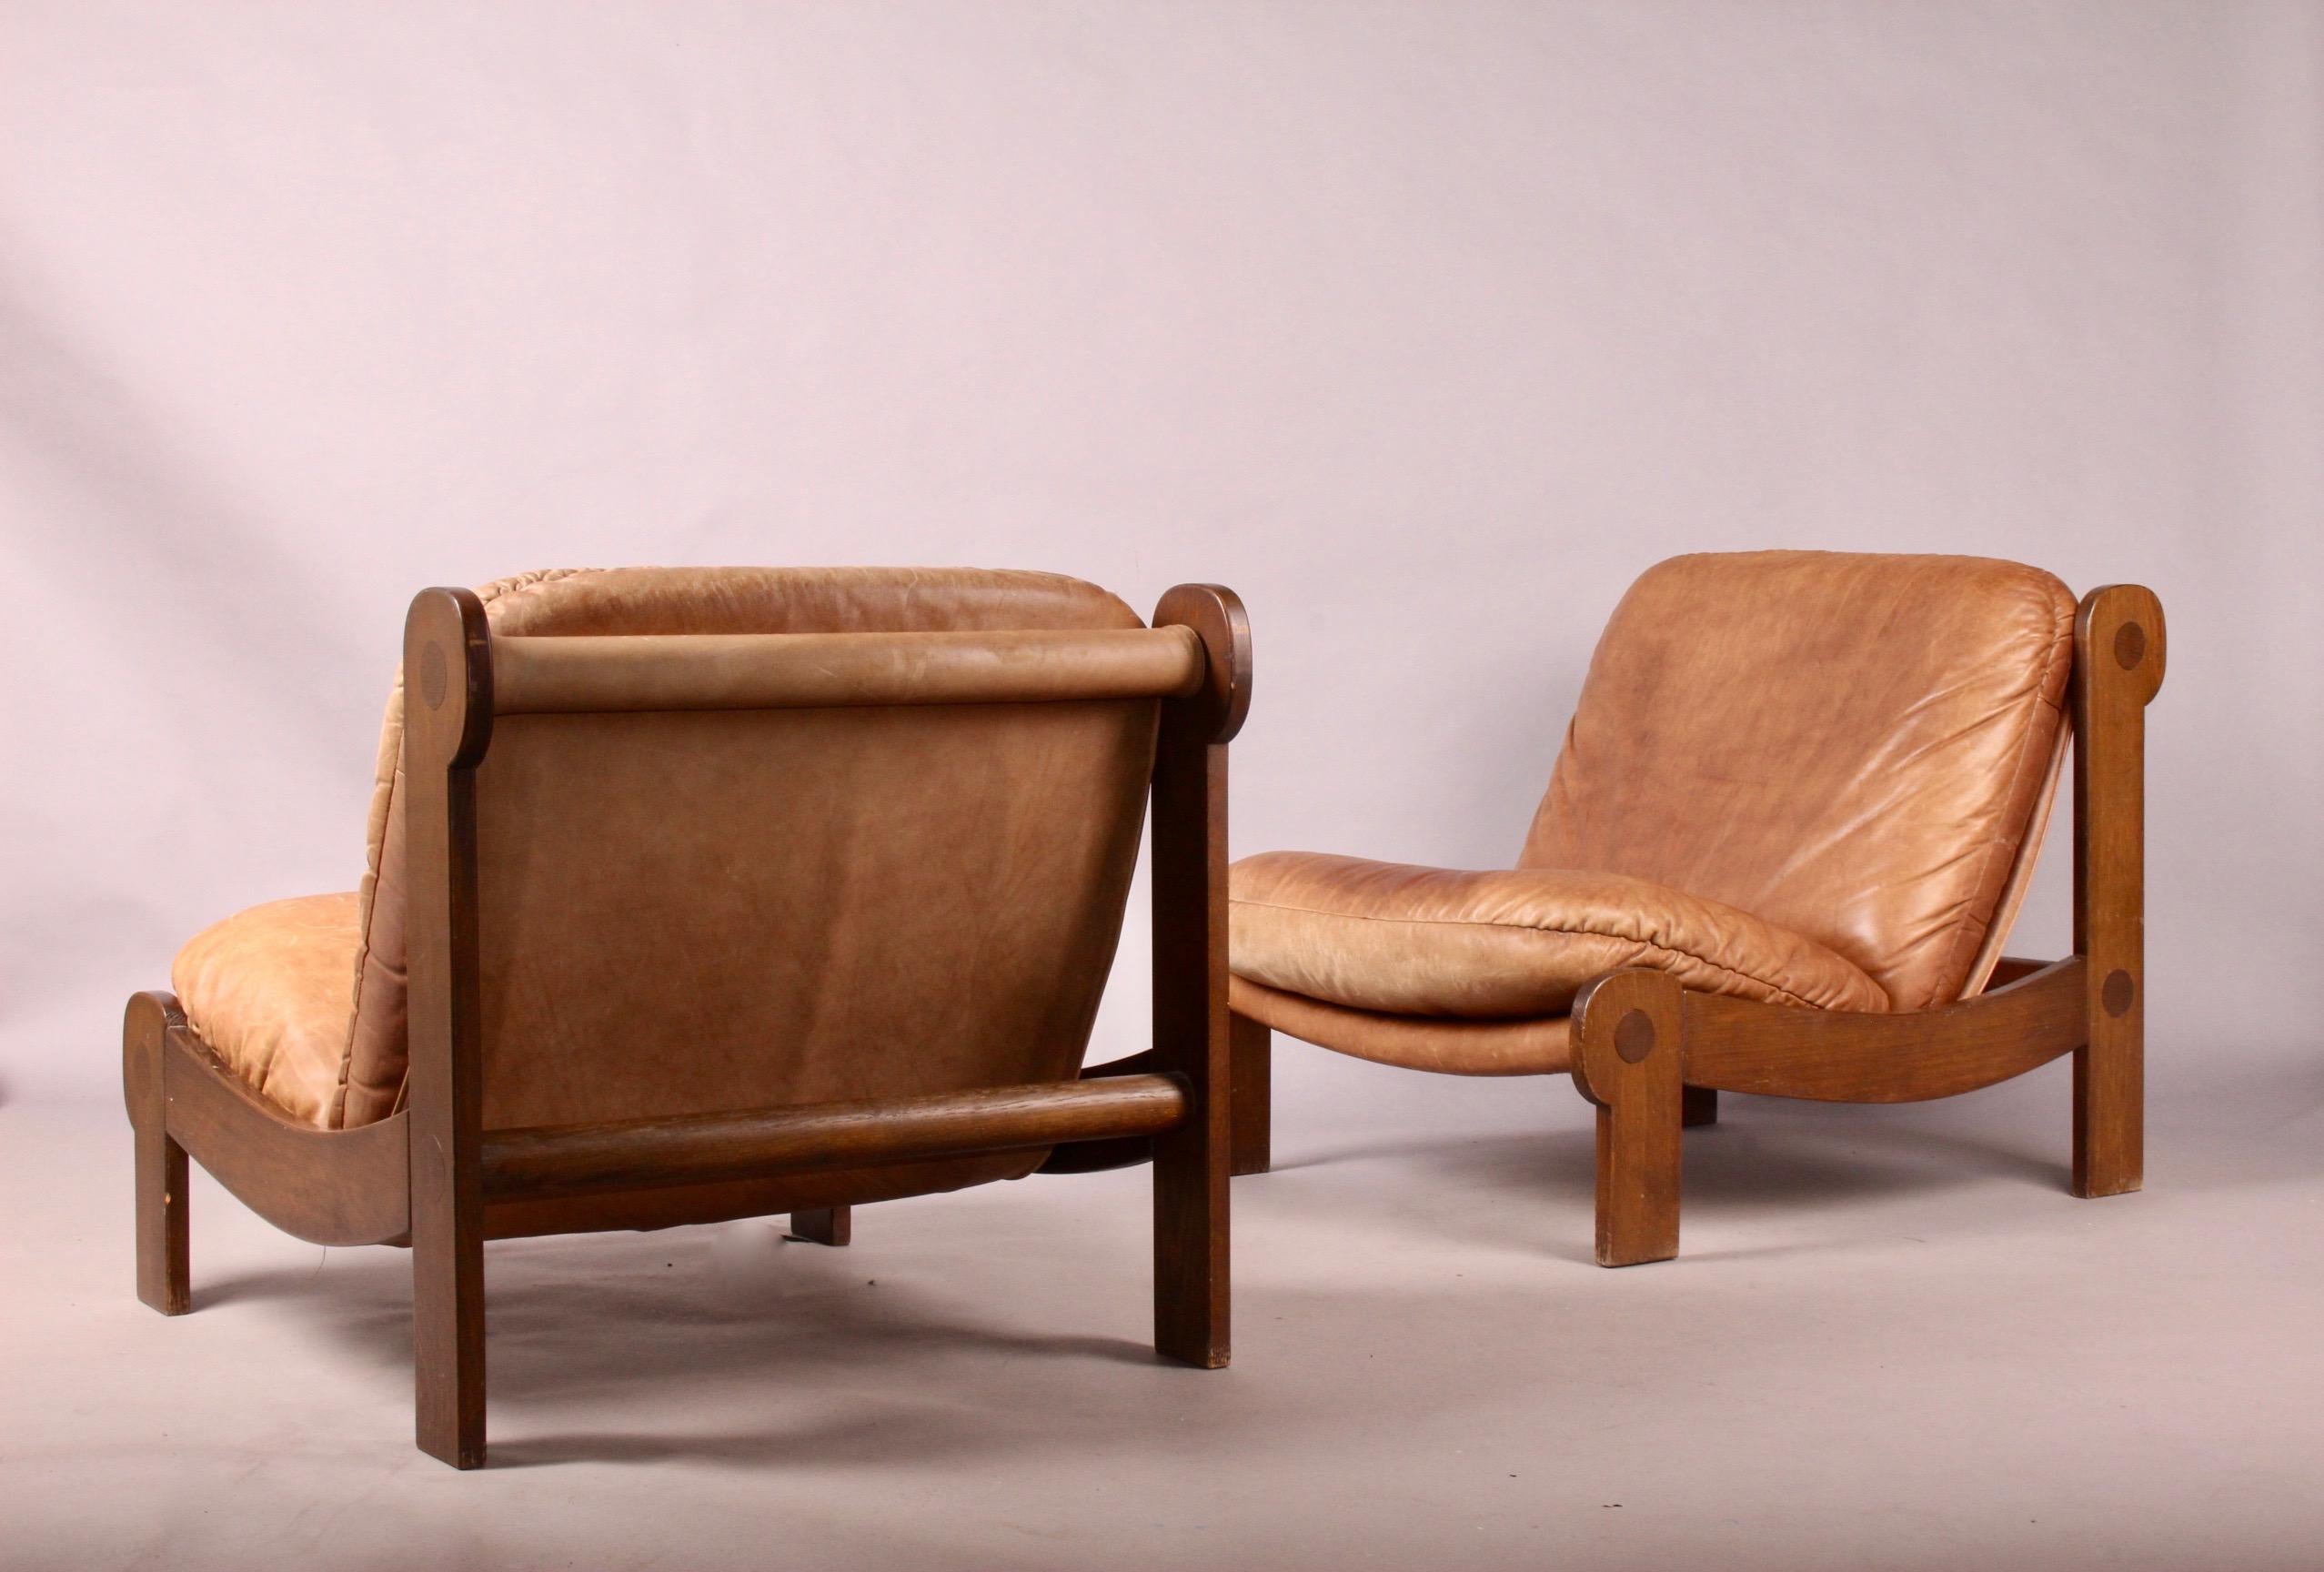 Pair of leather and wood armchairs, nice patina.